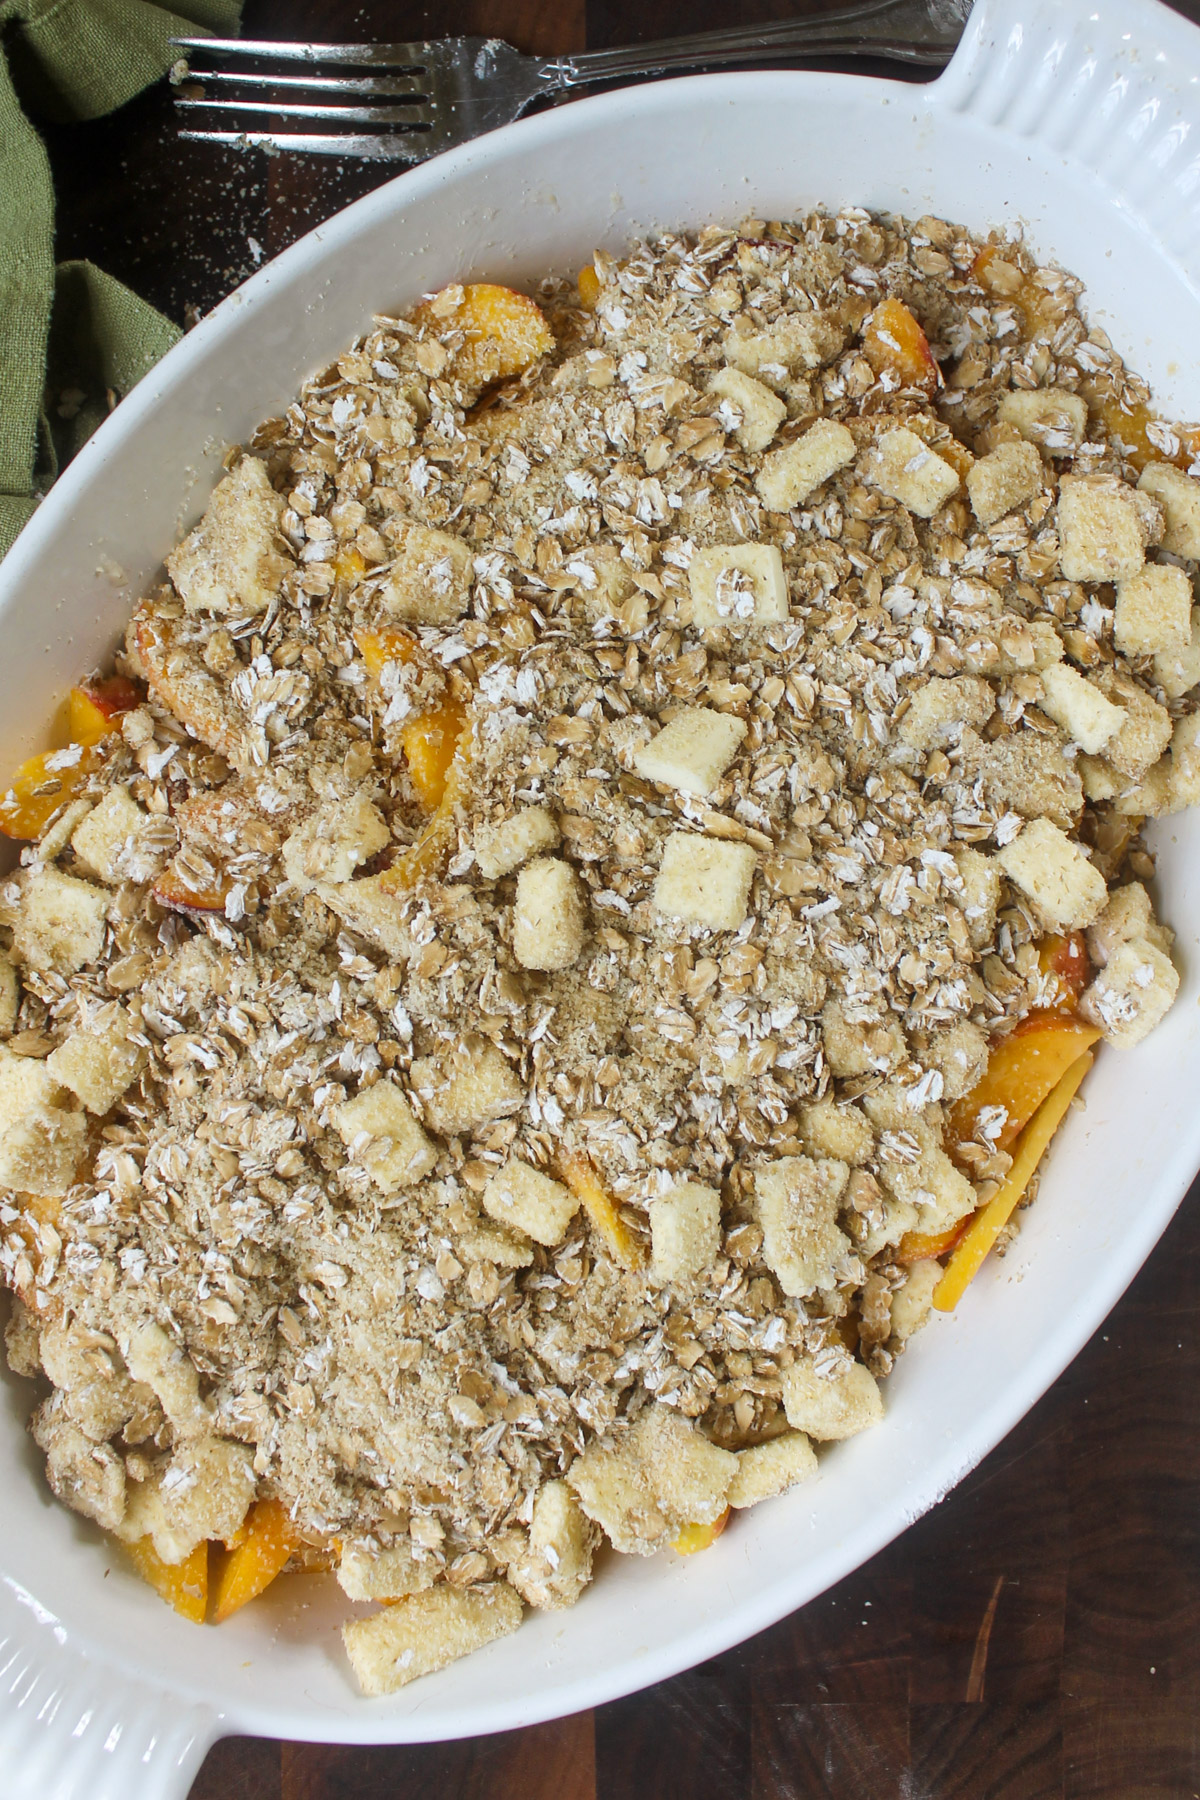 Unbaked peach crisp with the oat mixture poured over the peaches in a baking dish.